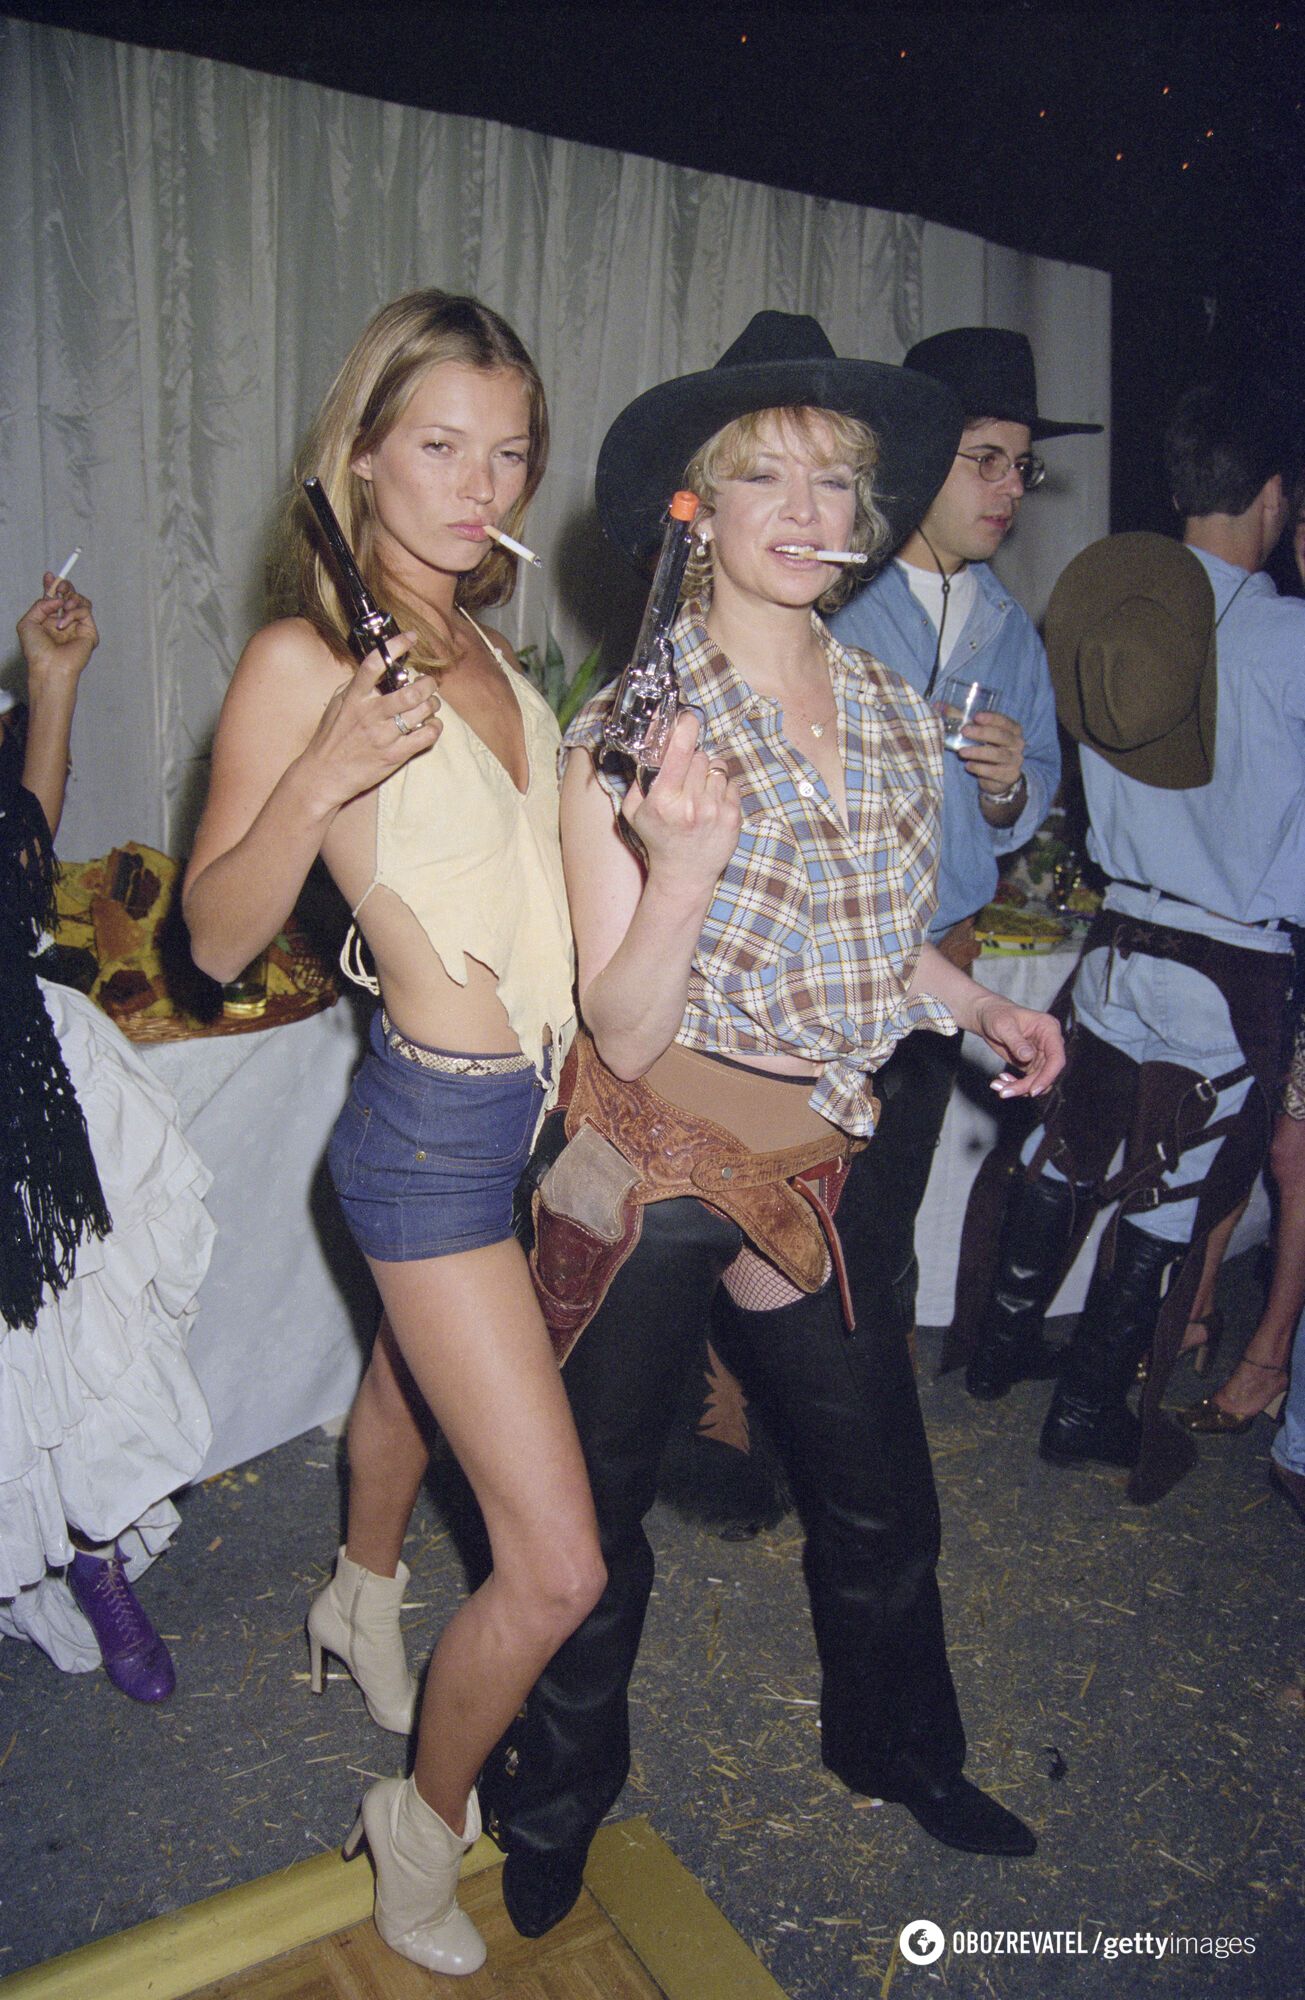 Kate Moss is 50! What the queen of ''heroin chic'' and the most scandalous supermodel of the twentieth century looks like today